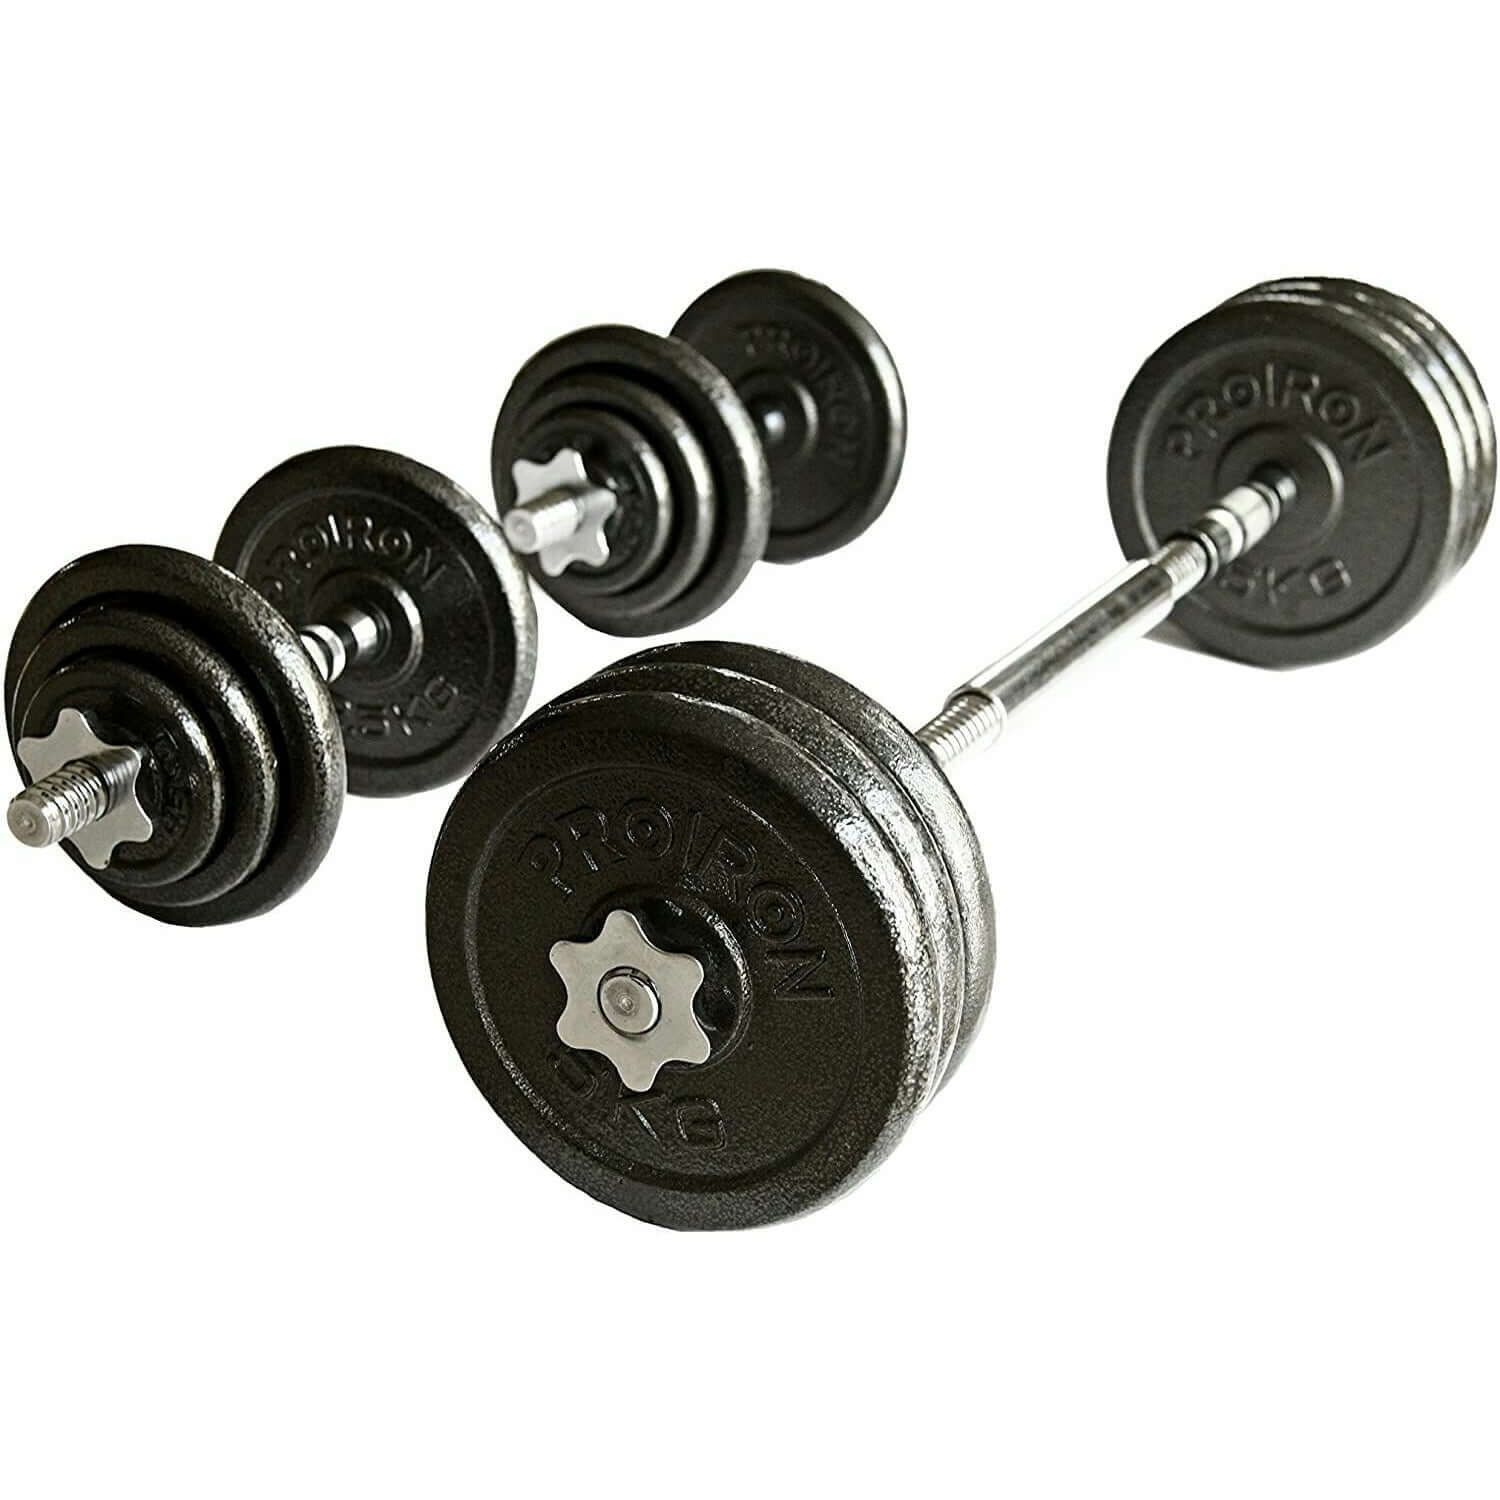 Adjustable Dumbbell & Barbell Set (20kg) | In Stock - Catch Fitness - Adjustable Dumbbell Handles, Barbell Set - Barbell Set | Gym and Fitness Equipment